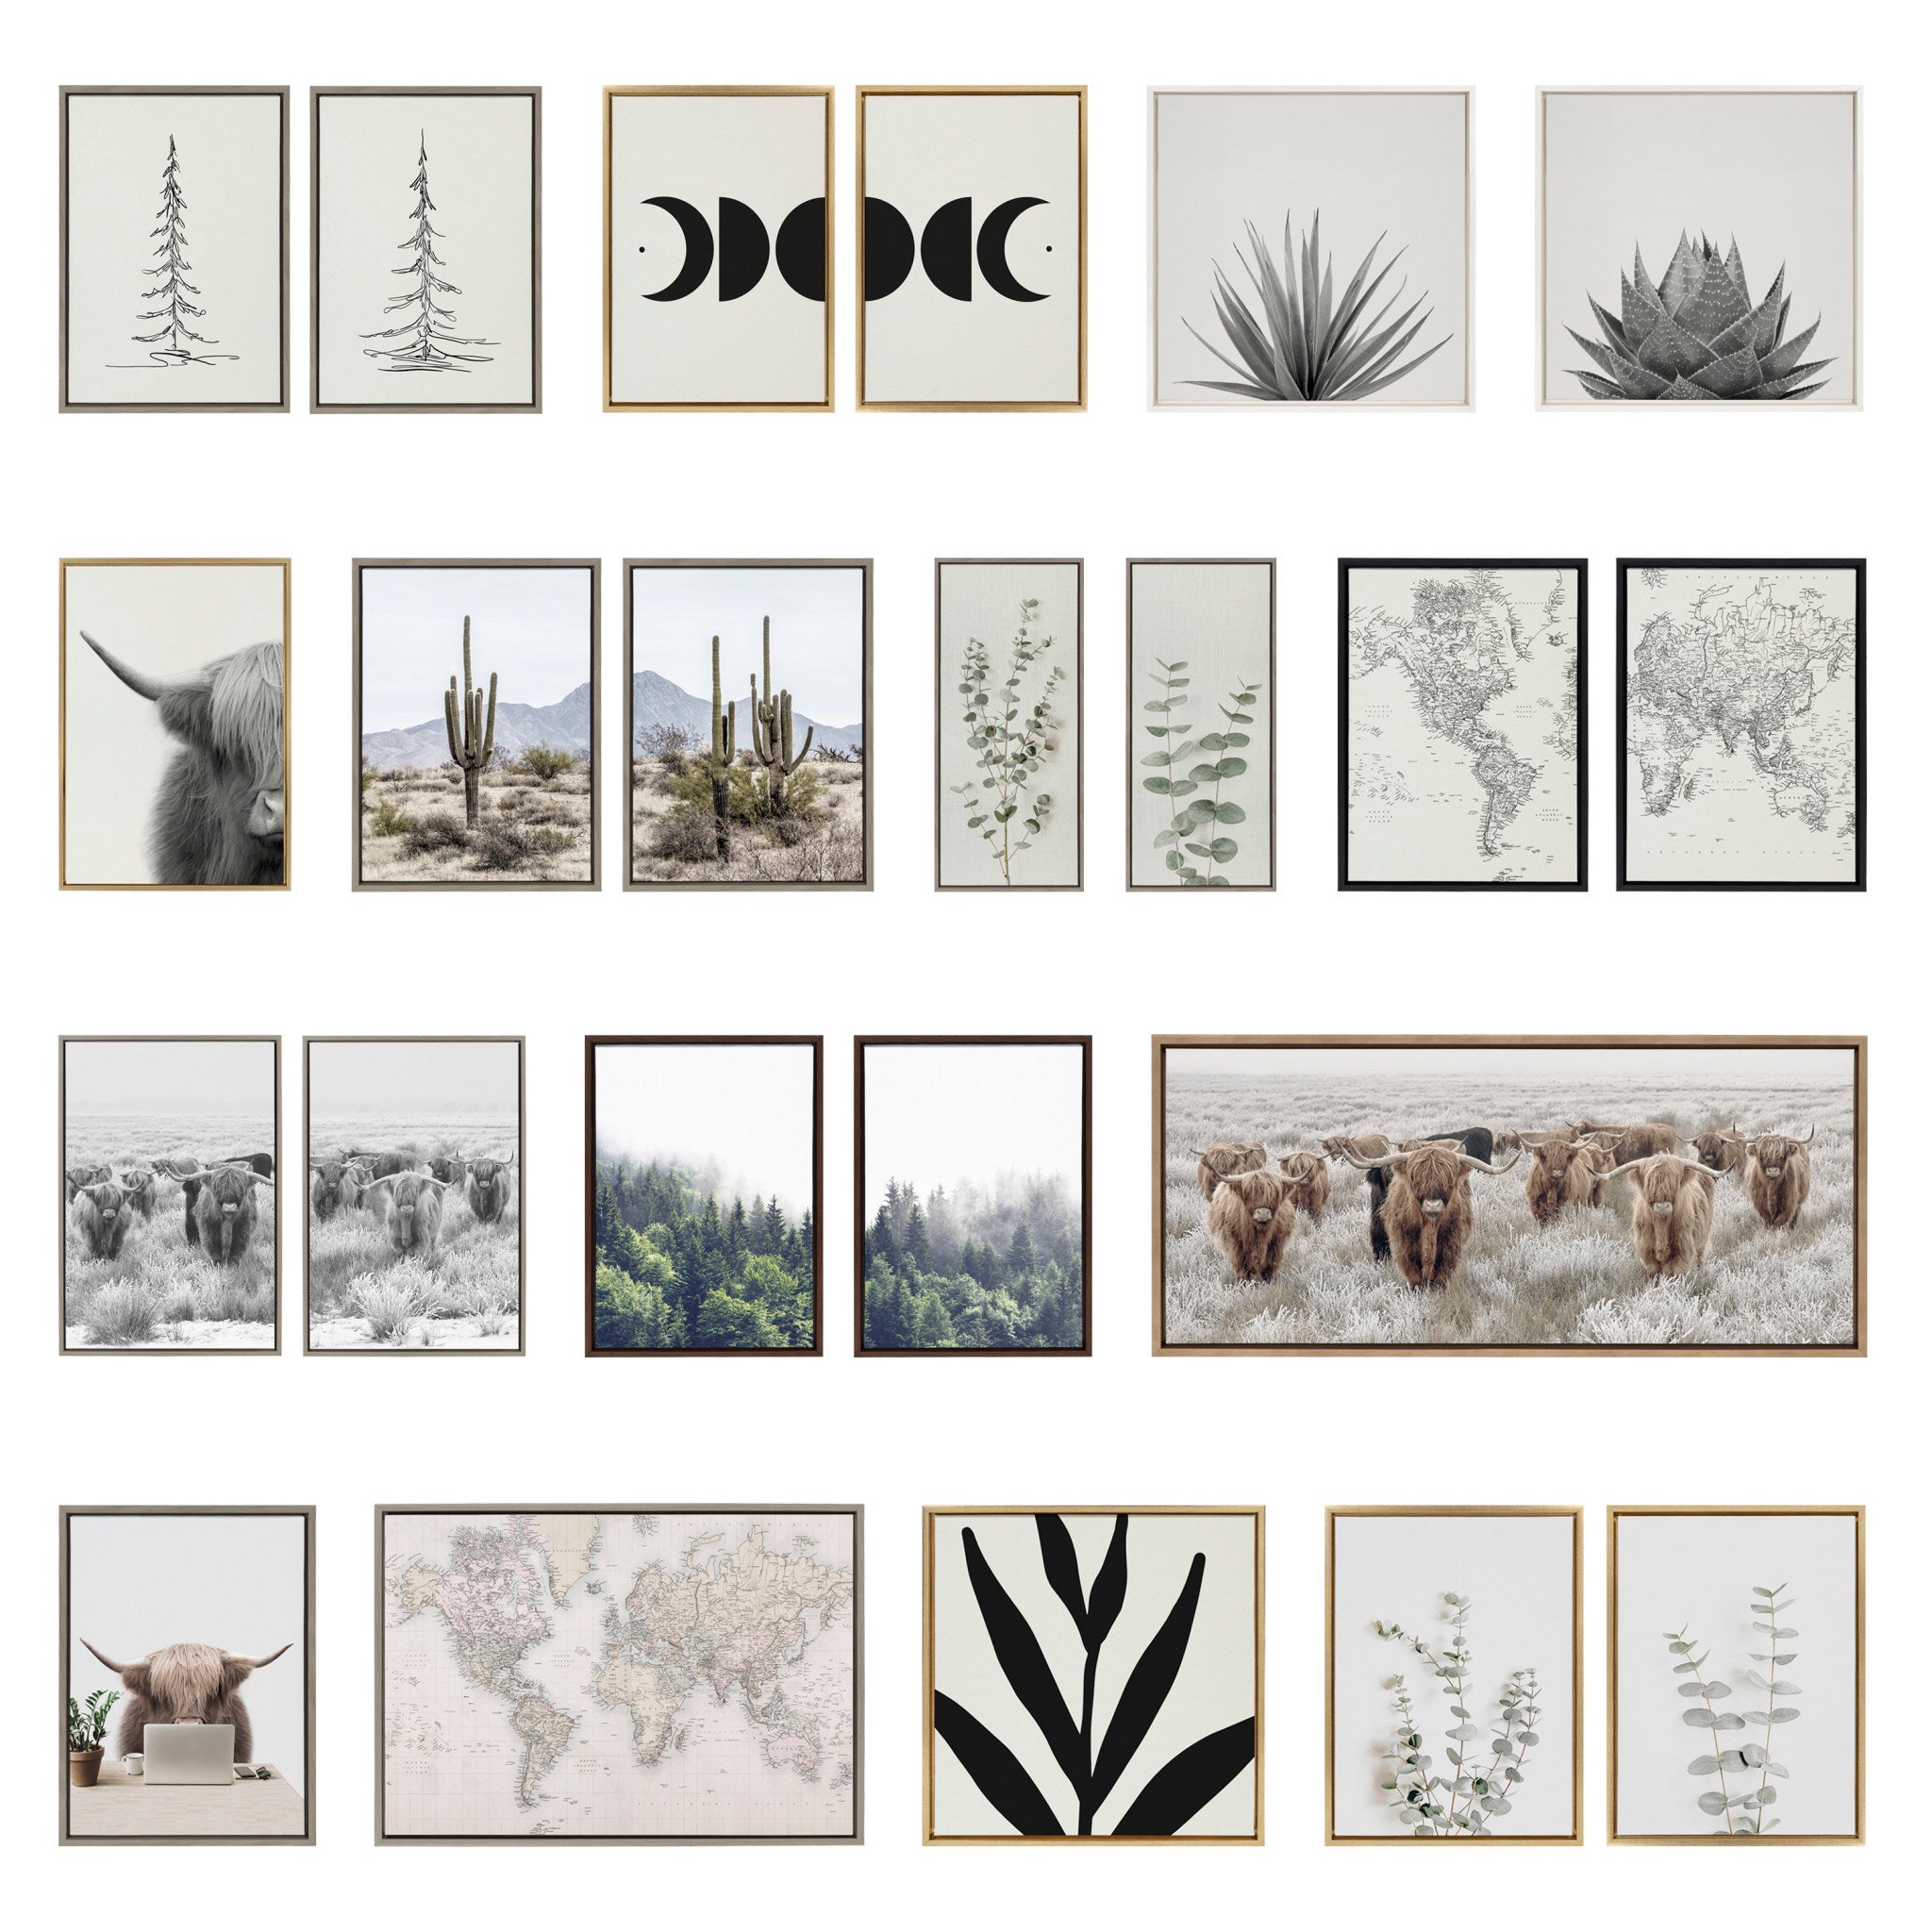 Sylvie Muted Illustrated Botanical Black and White Framed Canvas by The Creative Bunch Studio